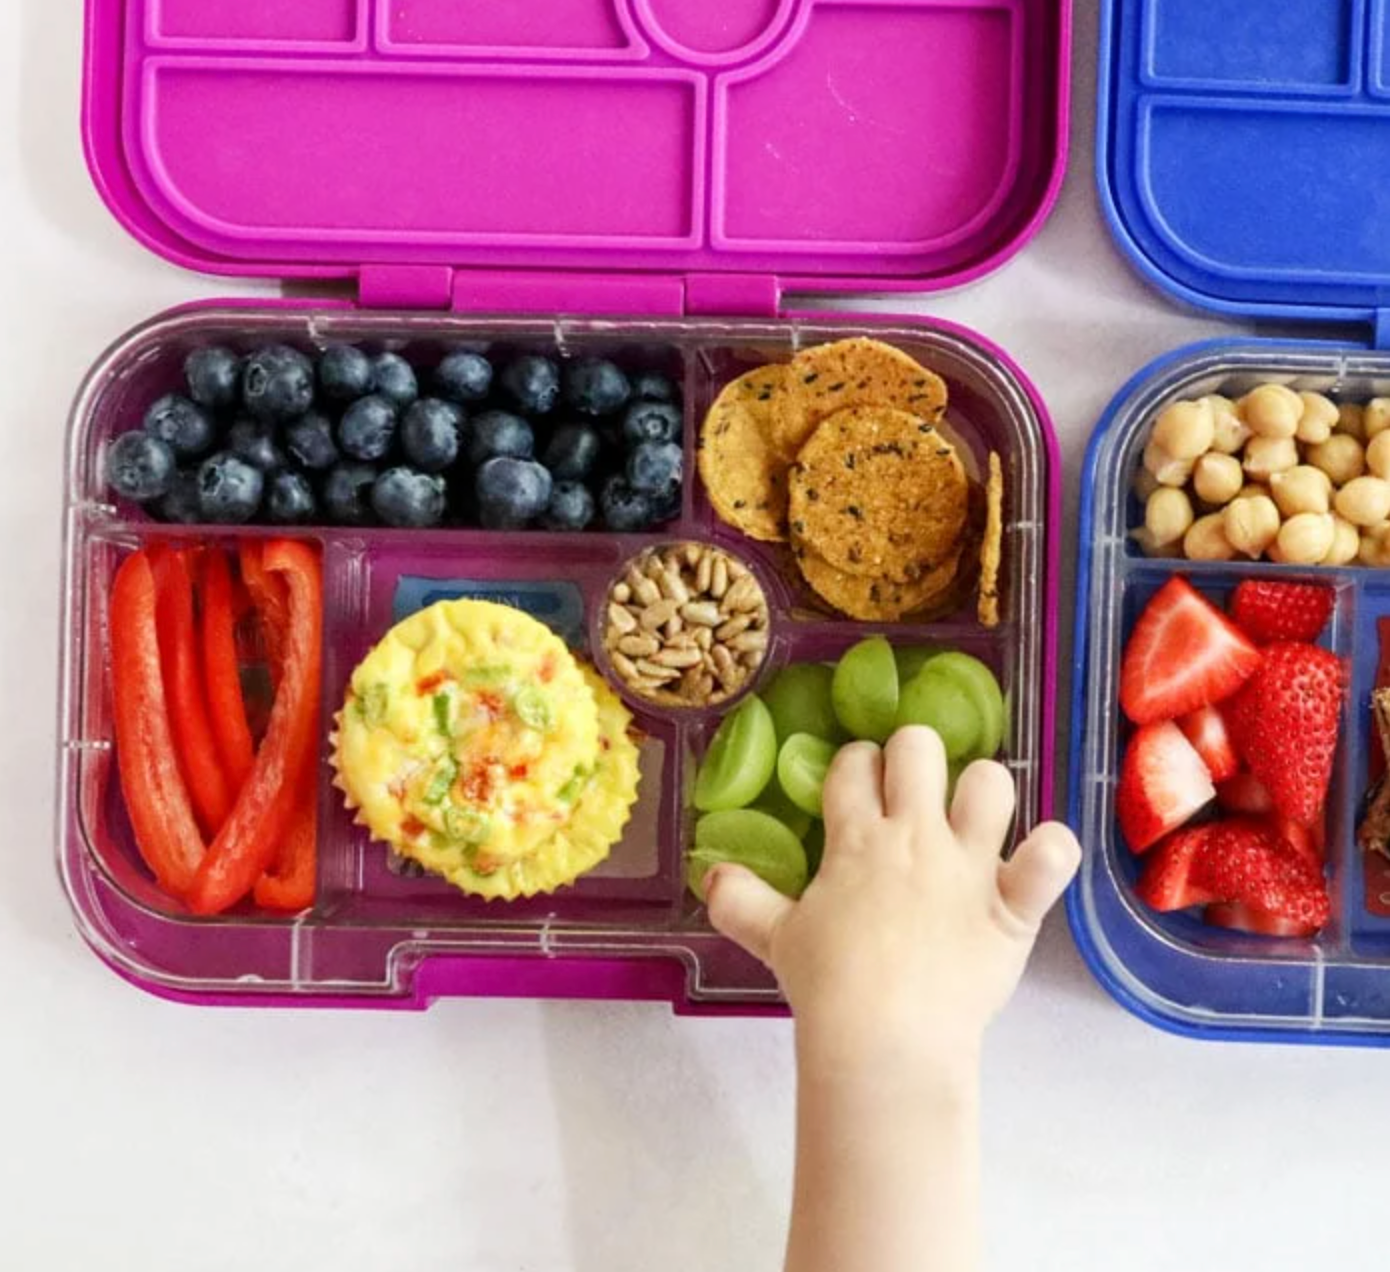 Get back to school with fun filled lunch boxes!